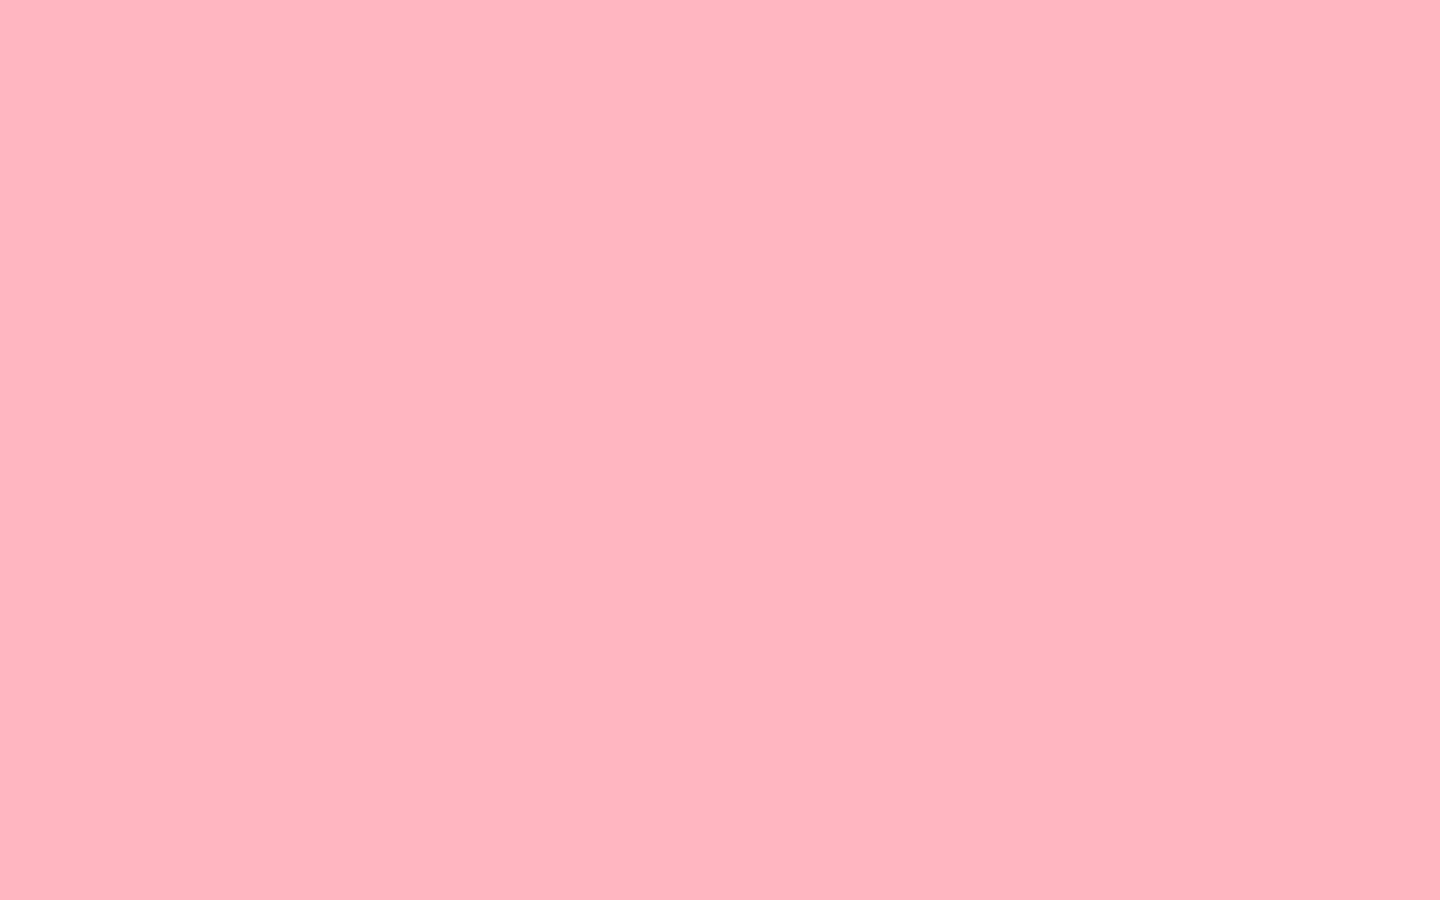 Free 1440x900 resolution Light Pink solid color background view and